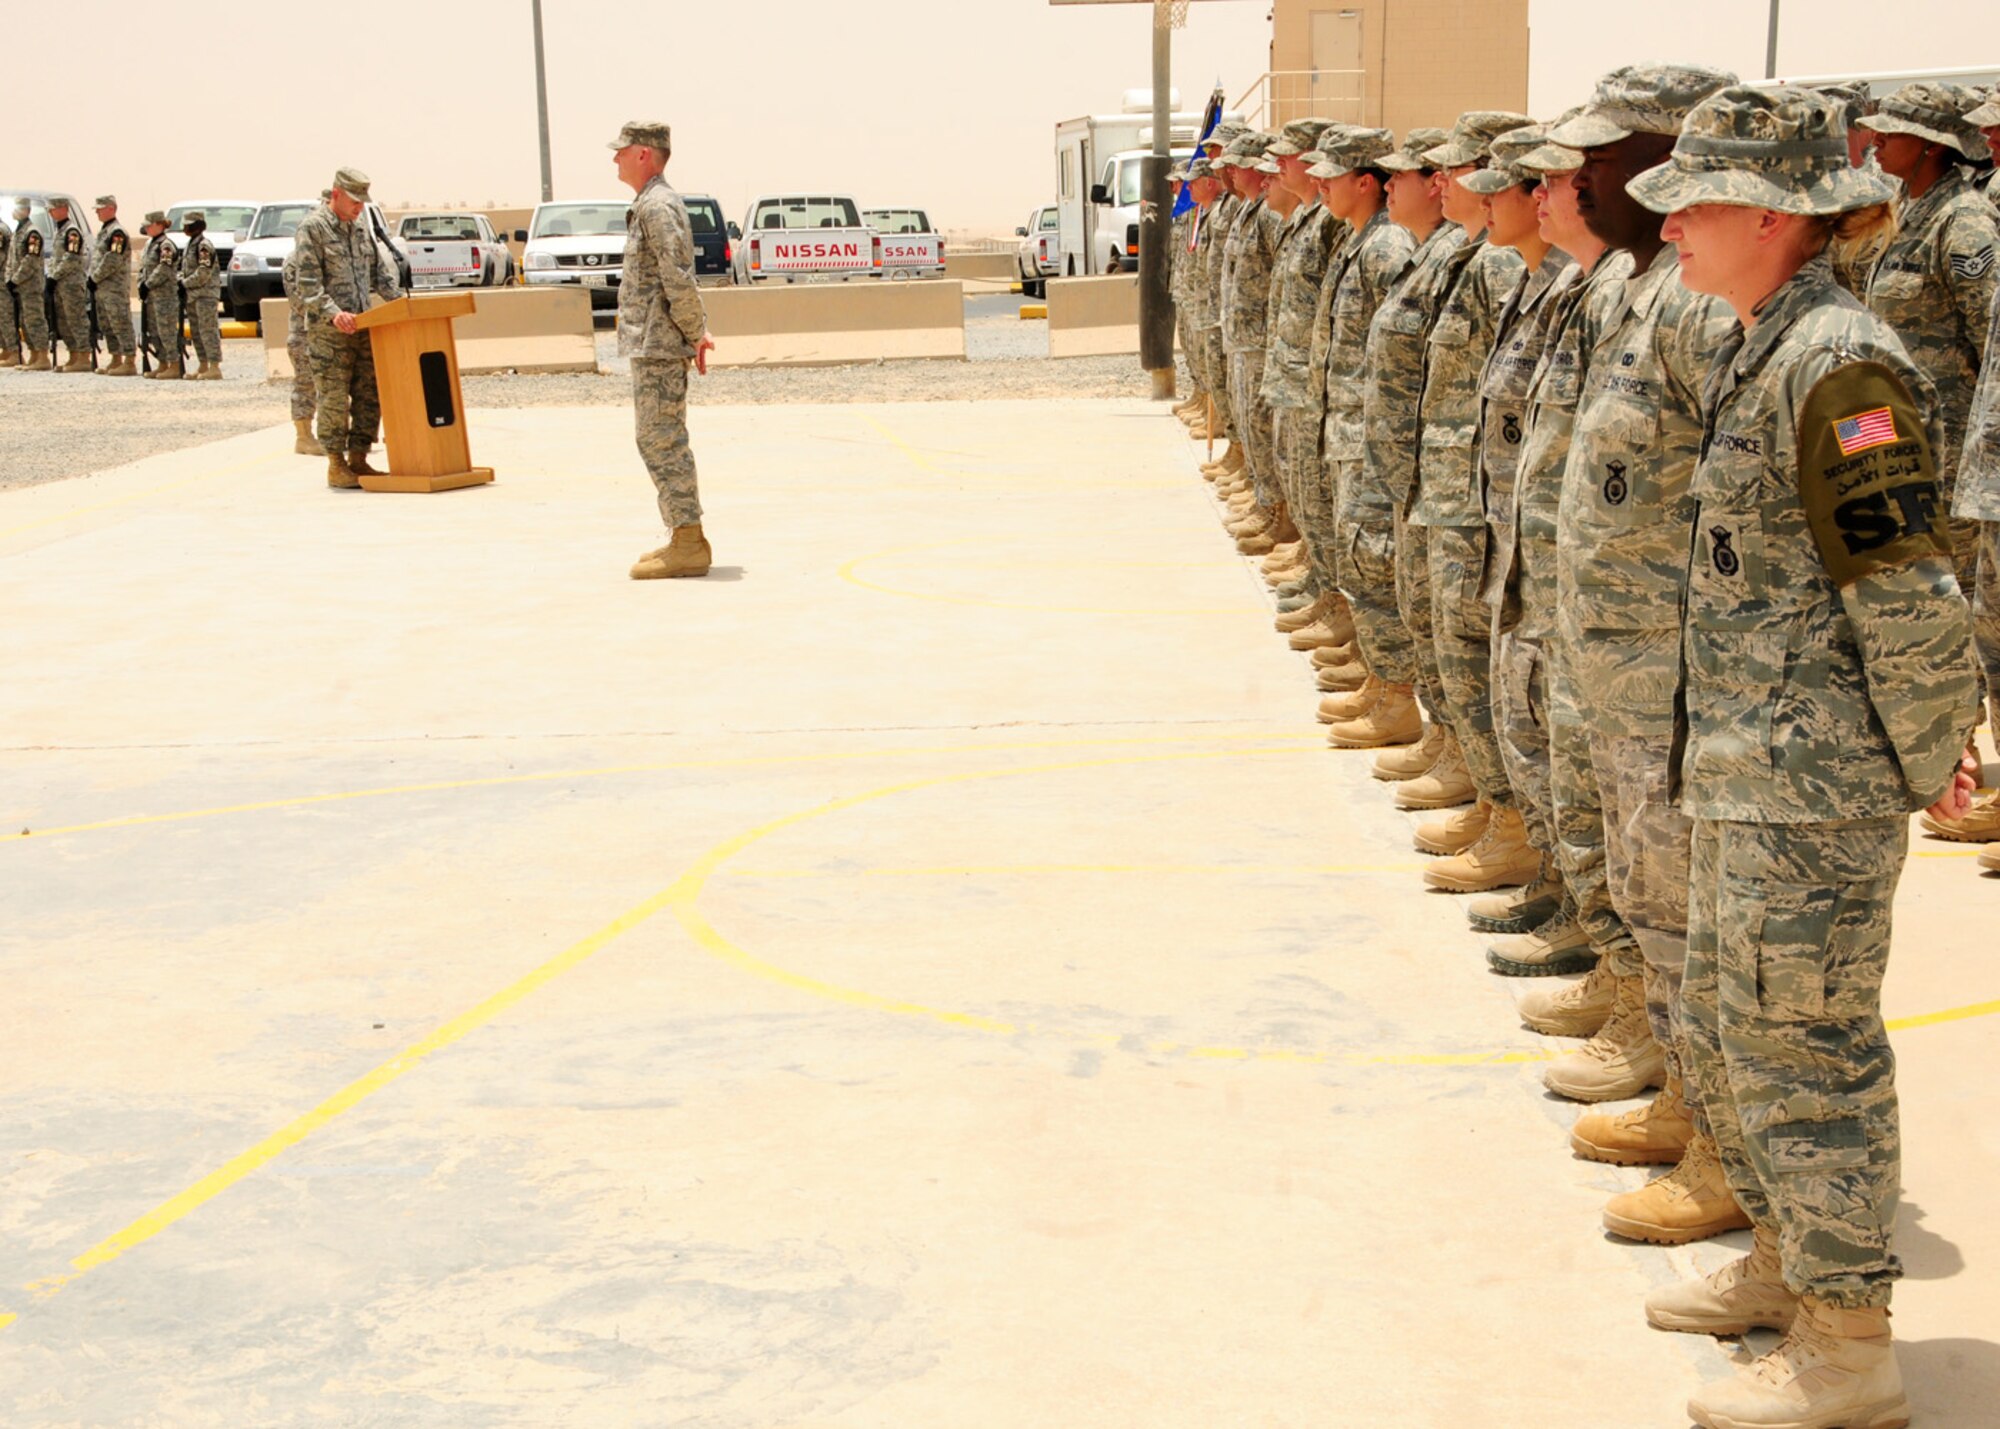 SOUTHWEST ASIA -- Airmen from the 386th Air Expeditionary Wing stand at parade rest while listening to an address from Col. Cameron Torrens, 386th AEW commander, during the Memorial Day ceremony at an air base in Southwest Asia, May 25. During the ceremony Taps was played by bugle, the base Honor Guard performed a 21 gun salute and the flag was raised from half-staff to full-staff. Colonel Torrens is originally from Montesano, Wash. (U.S. Air Force photo/ Senior Airman Courtney Richardson)